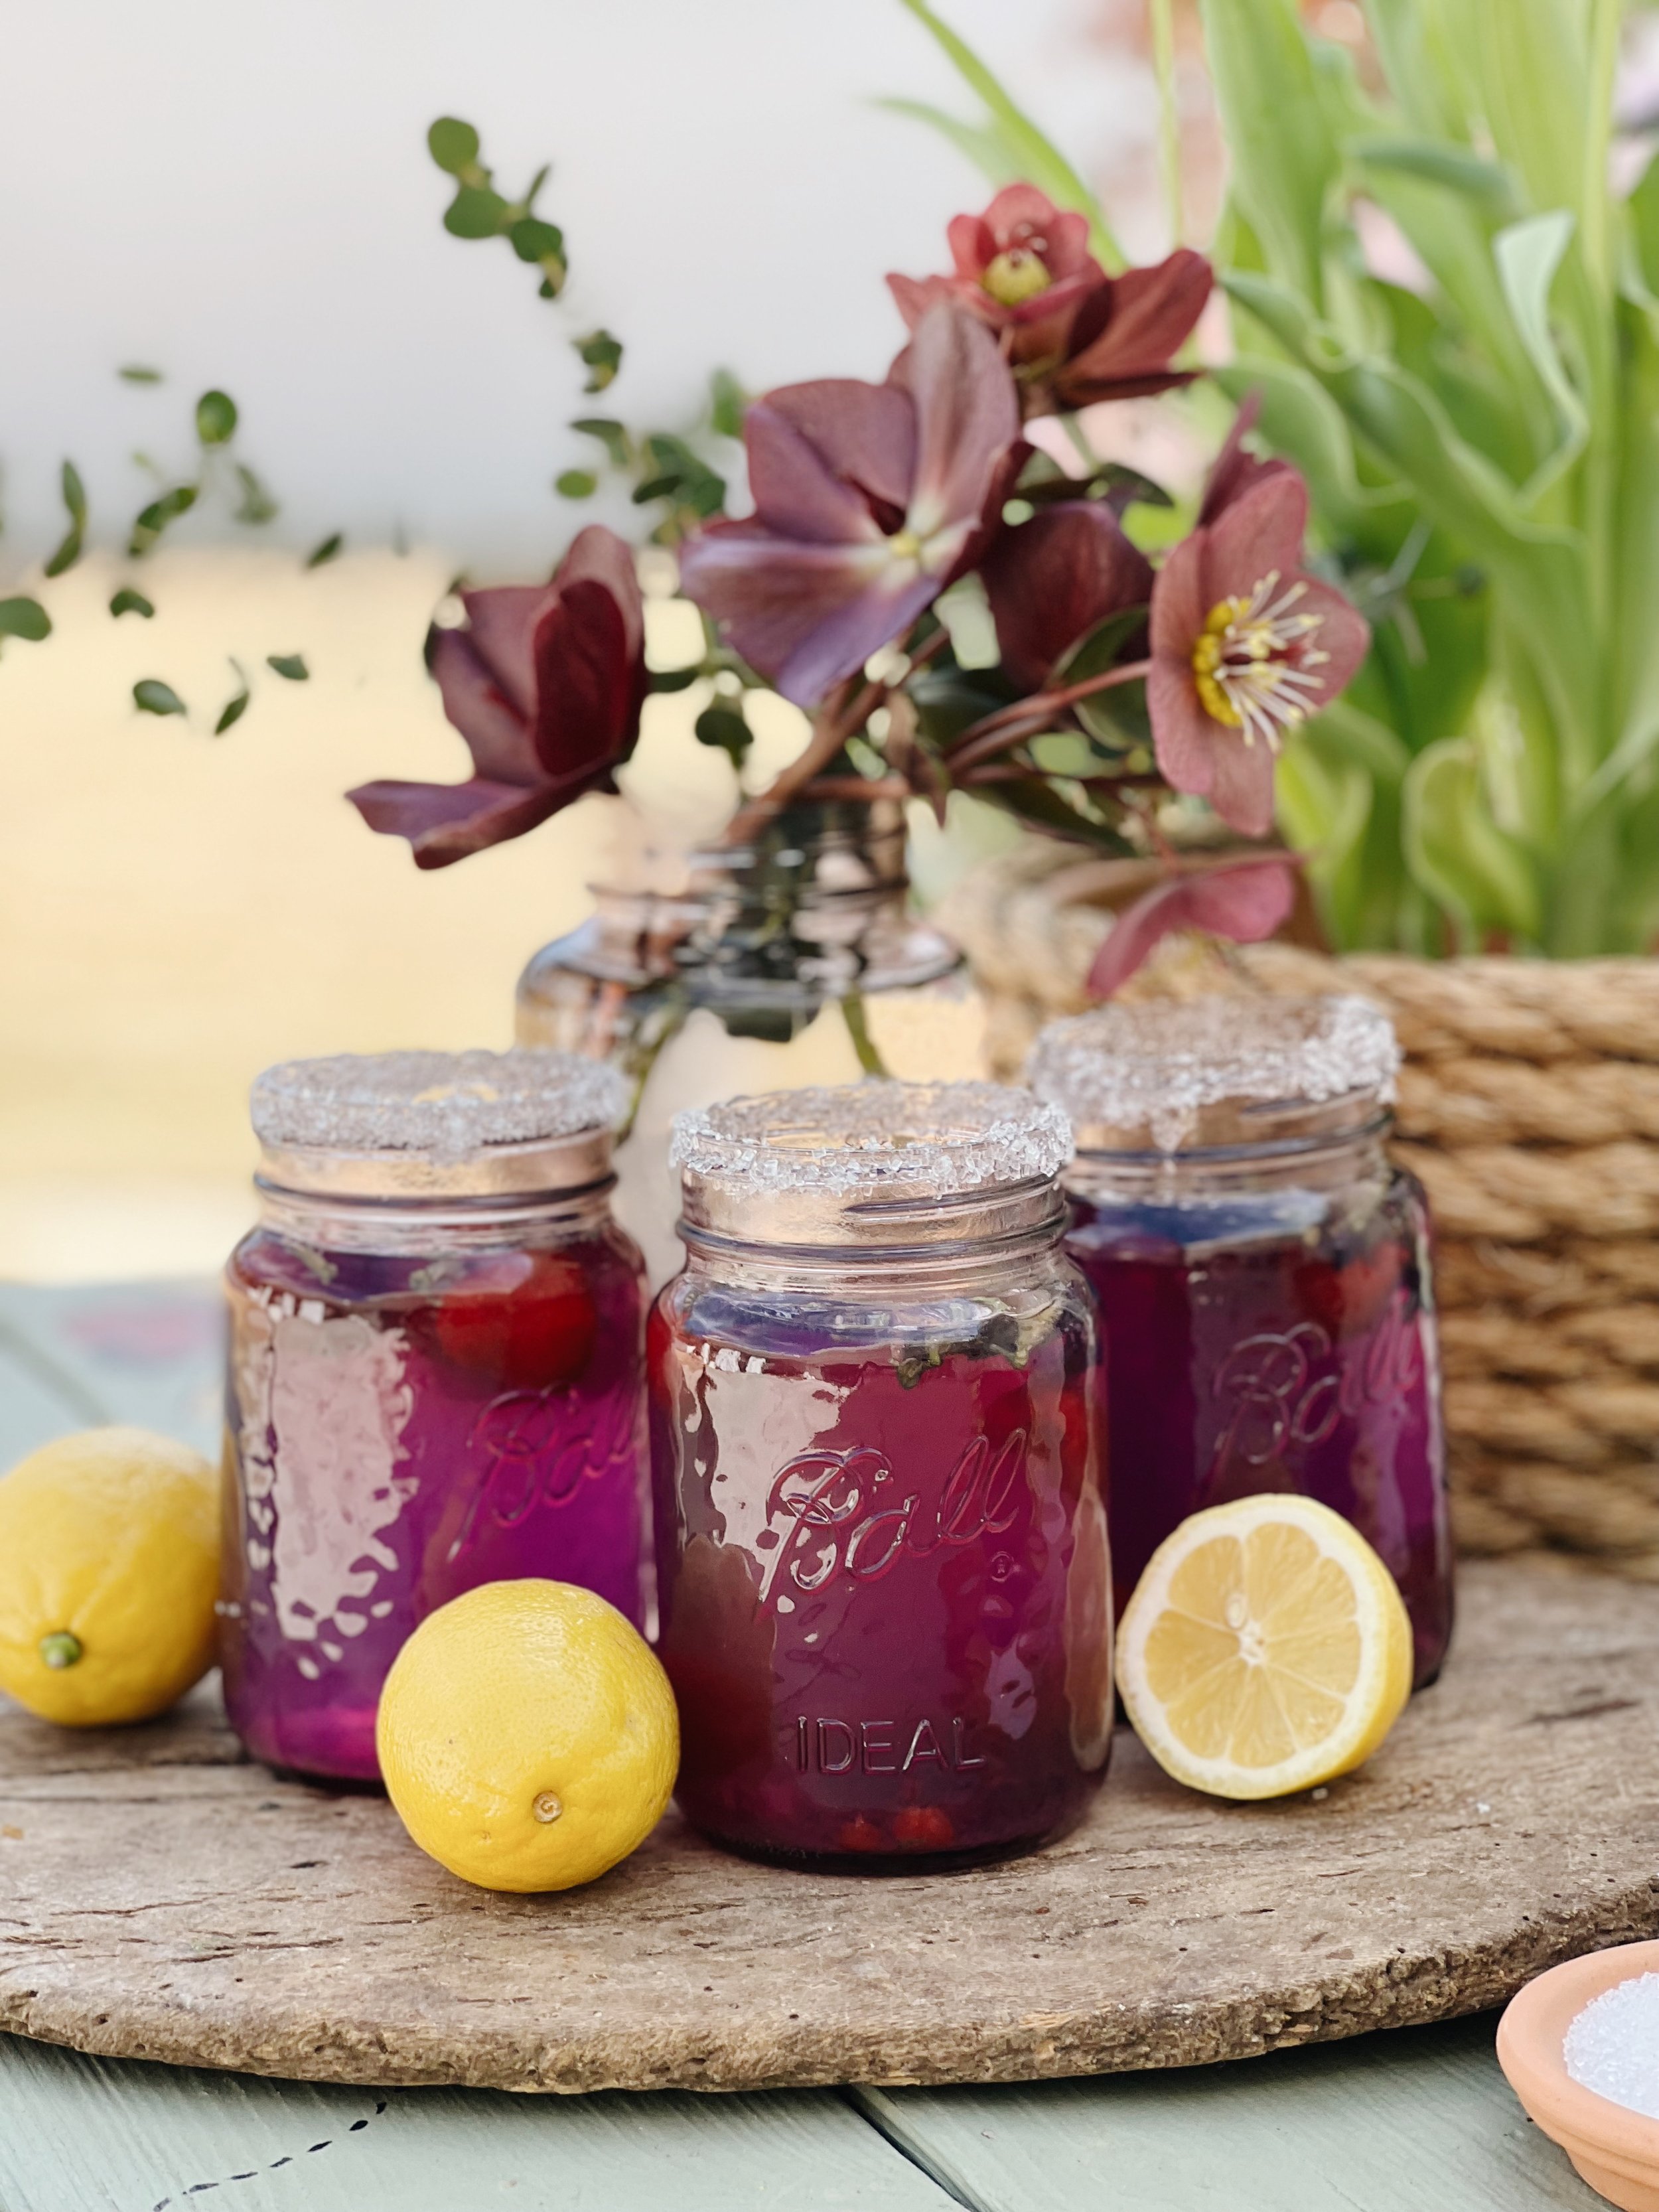 A Refreshing Blue Butterfly Tea Recipe With Honey And Lemon - Perfect For  Spring! - Azure Farm